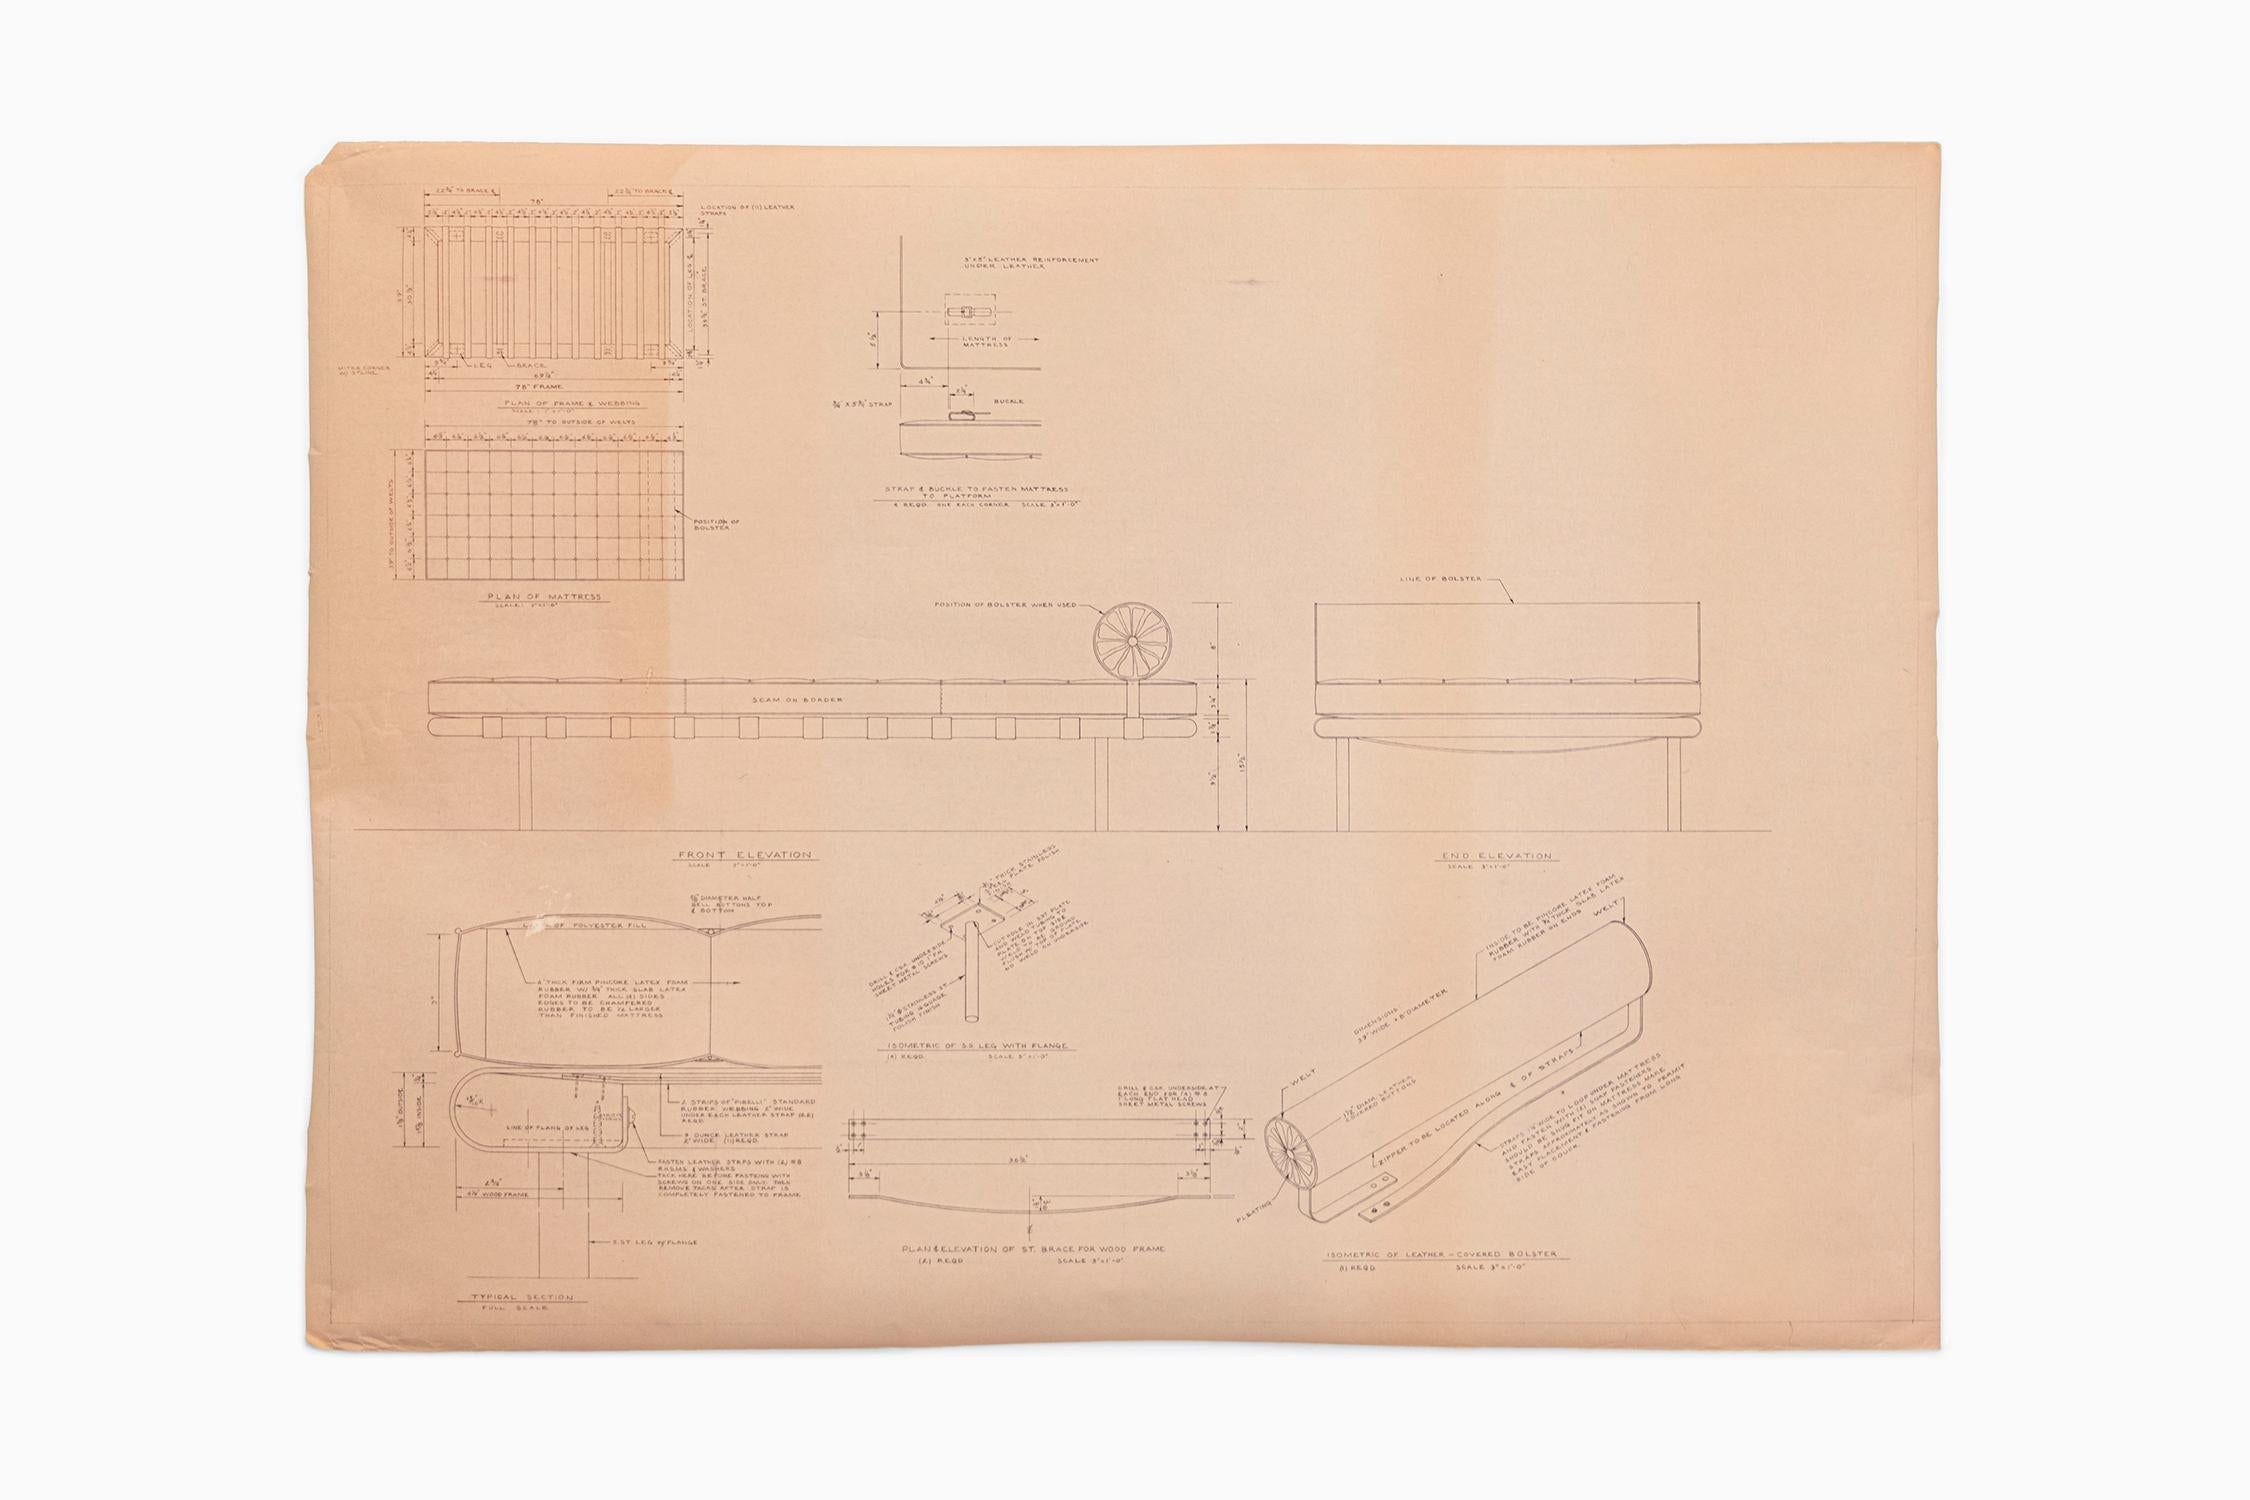 Couch design drawing

The Office of Mies van der Rohe 

designed by Ludwig Mies van der Rohe in 1930 for Philip Johnson’s New York City apartment

delineated by Edward A. Duckett, circa 1950s 

Blue line print 

Measures: 31” H x 41 ½” W